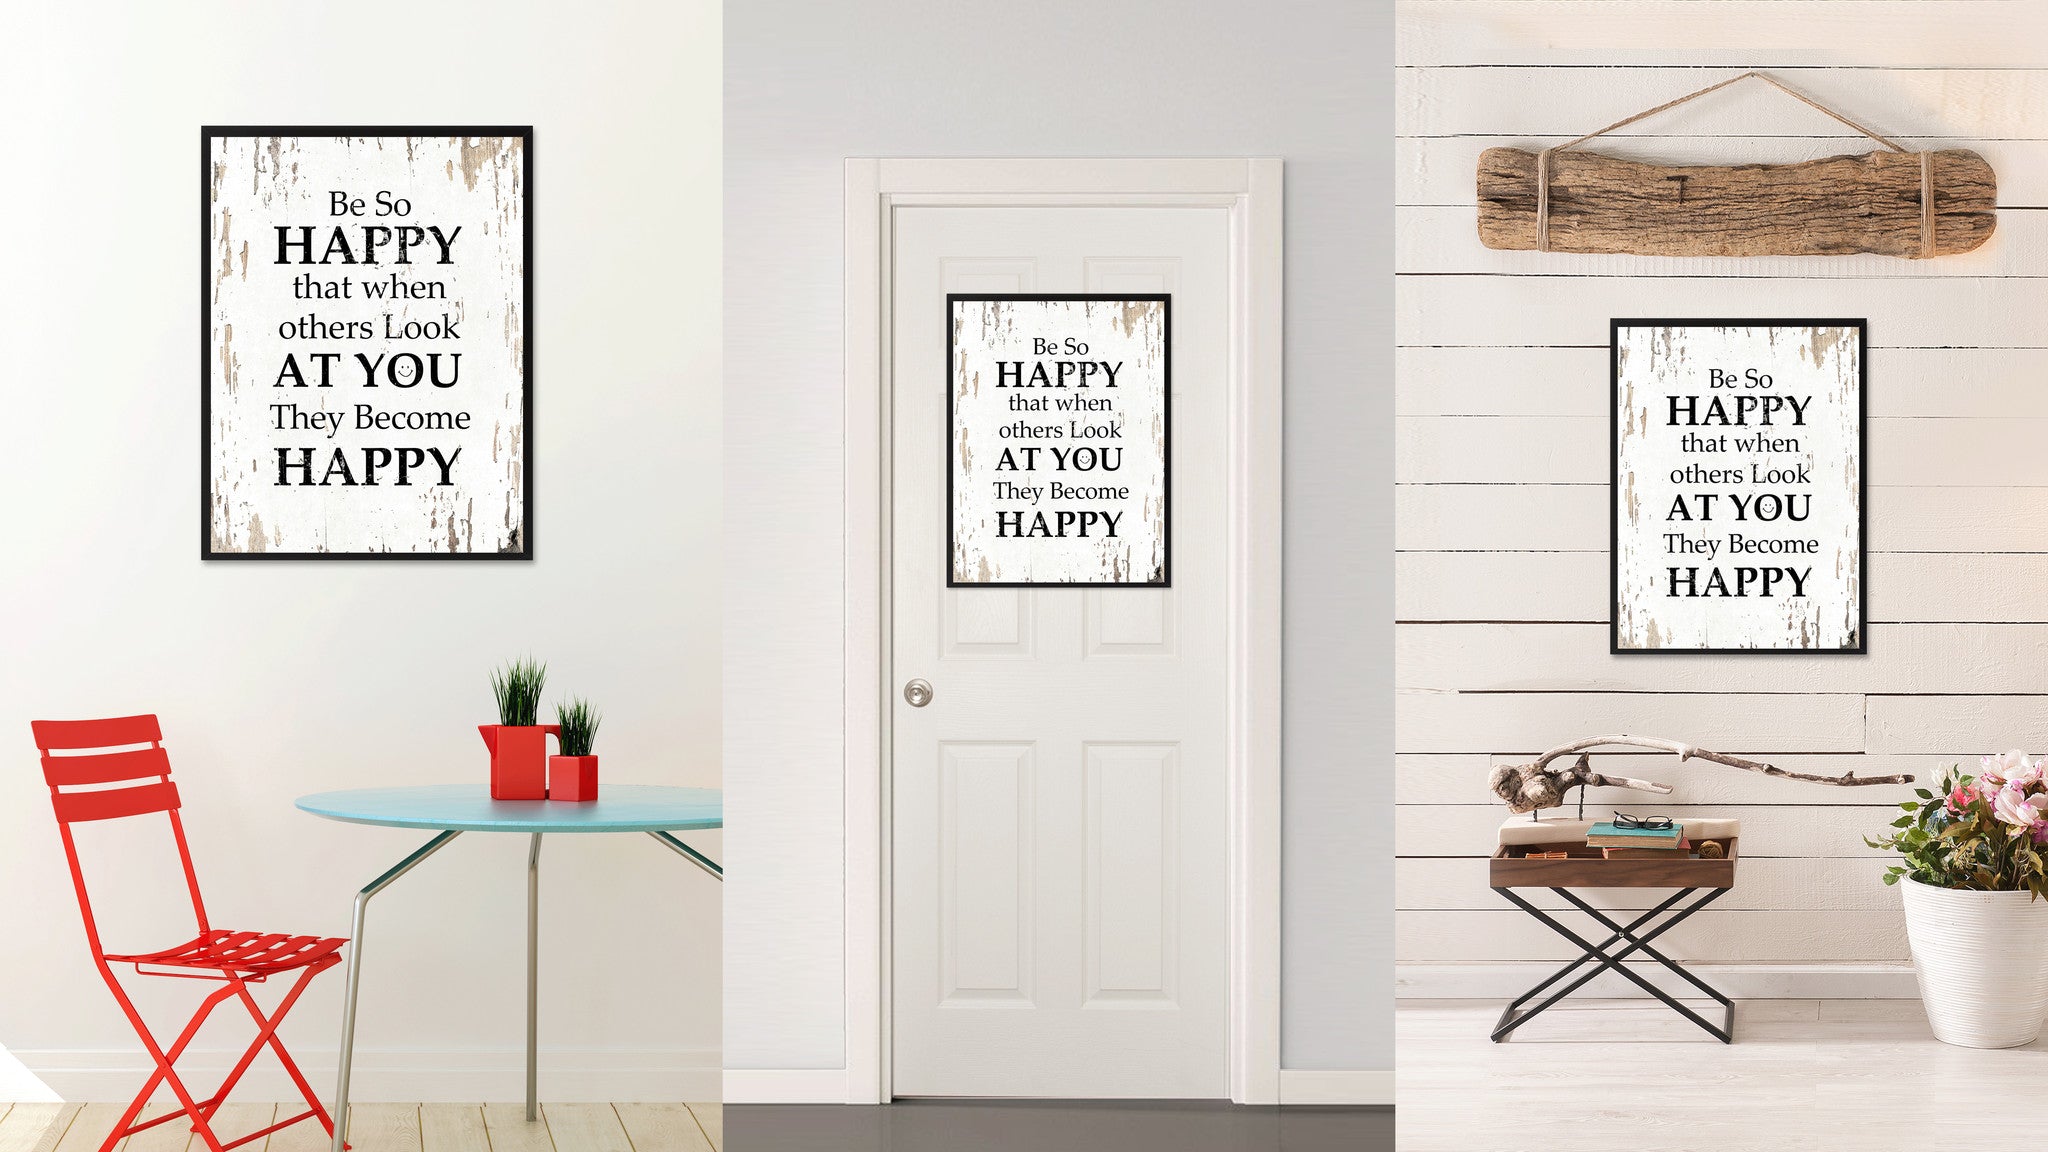 Be So Happy That When Others Look At You Saying Canvas Print, Black Picture Frame Home Decor Wall Art Gifts